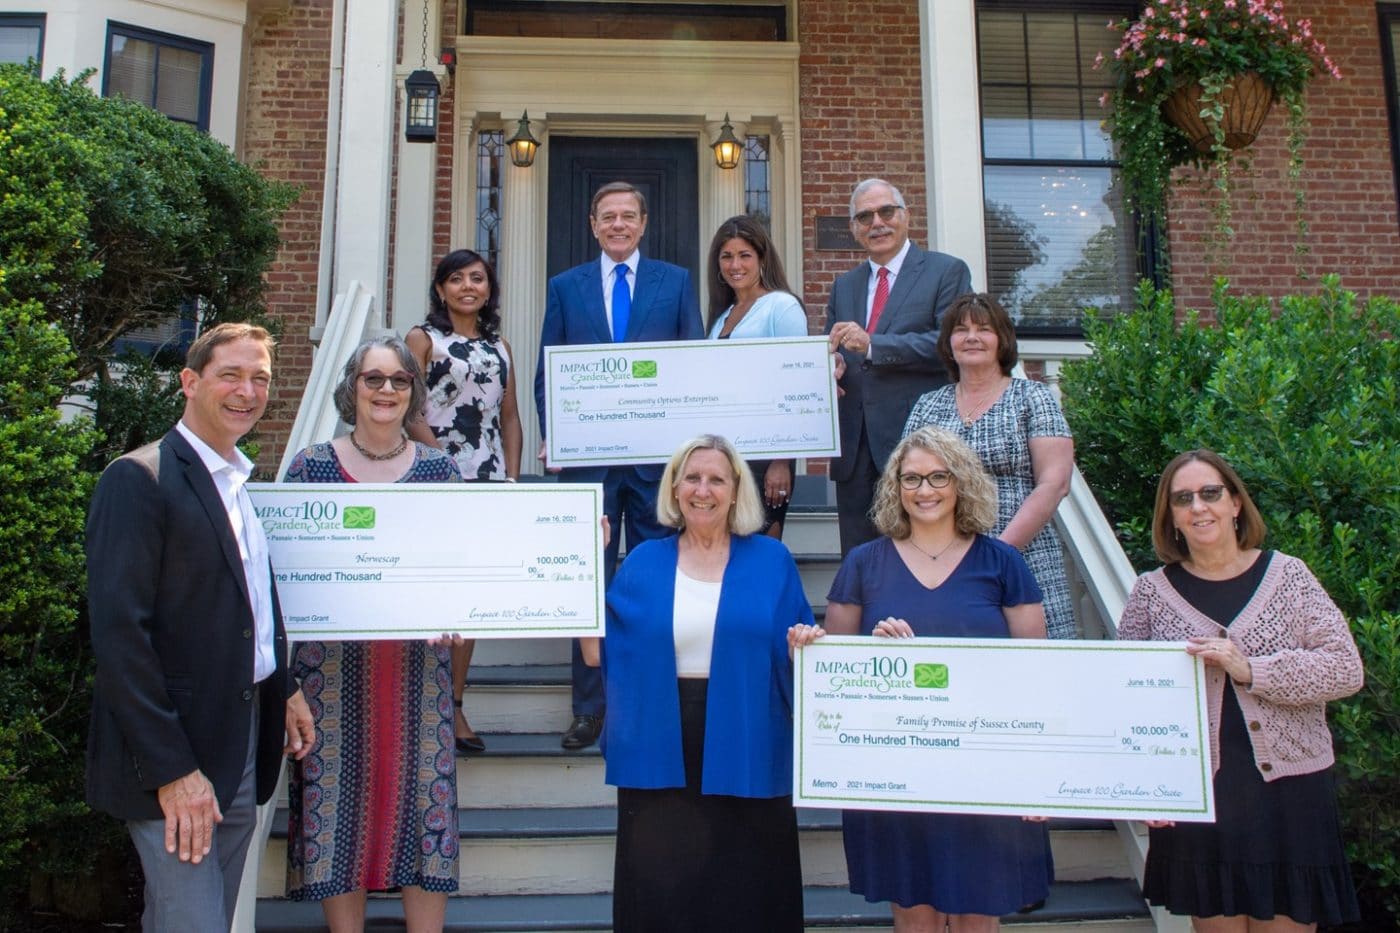 Impact 100 Garden State $100,000 Grant Recipients Front row, from left: from Norwescap: Mark Valli, CEO; Libby Haynes, Assistant director; Cecilia Genao, Program Coordinator; Debby Seme, President, Impact 100 Garden State; from Family Promise of Sussex County: Nichole Reed, Events Coordinator; Nancy Renna, Bookkeeper; Chris Butto, CEO. Back row, from left, from Community Options Enterprises: Robert Stack, President/CEO, Community Options, Inc; Dina Casalaspro, Managing Director; Phil Lian, Chairman of the Board.